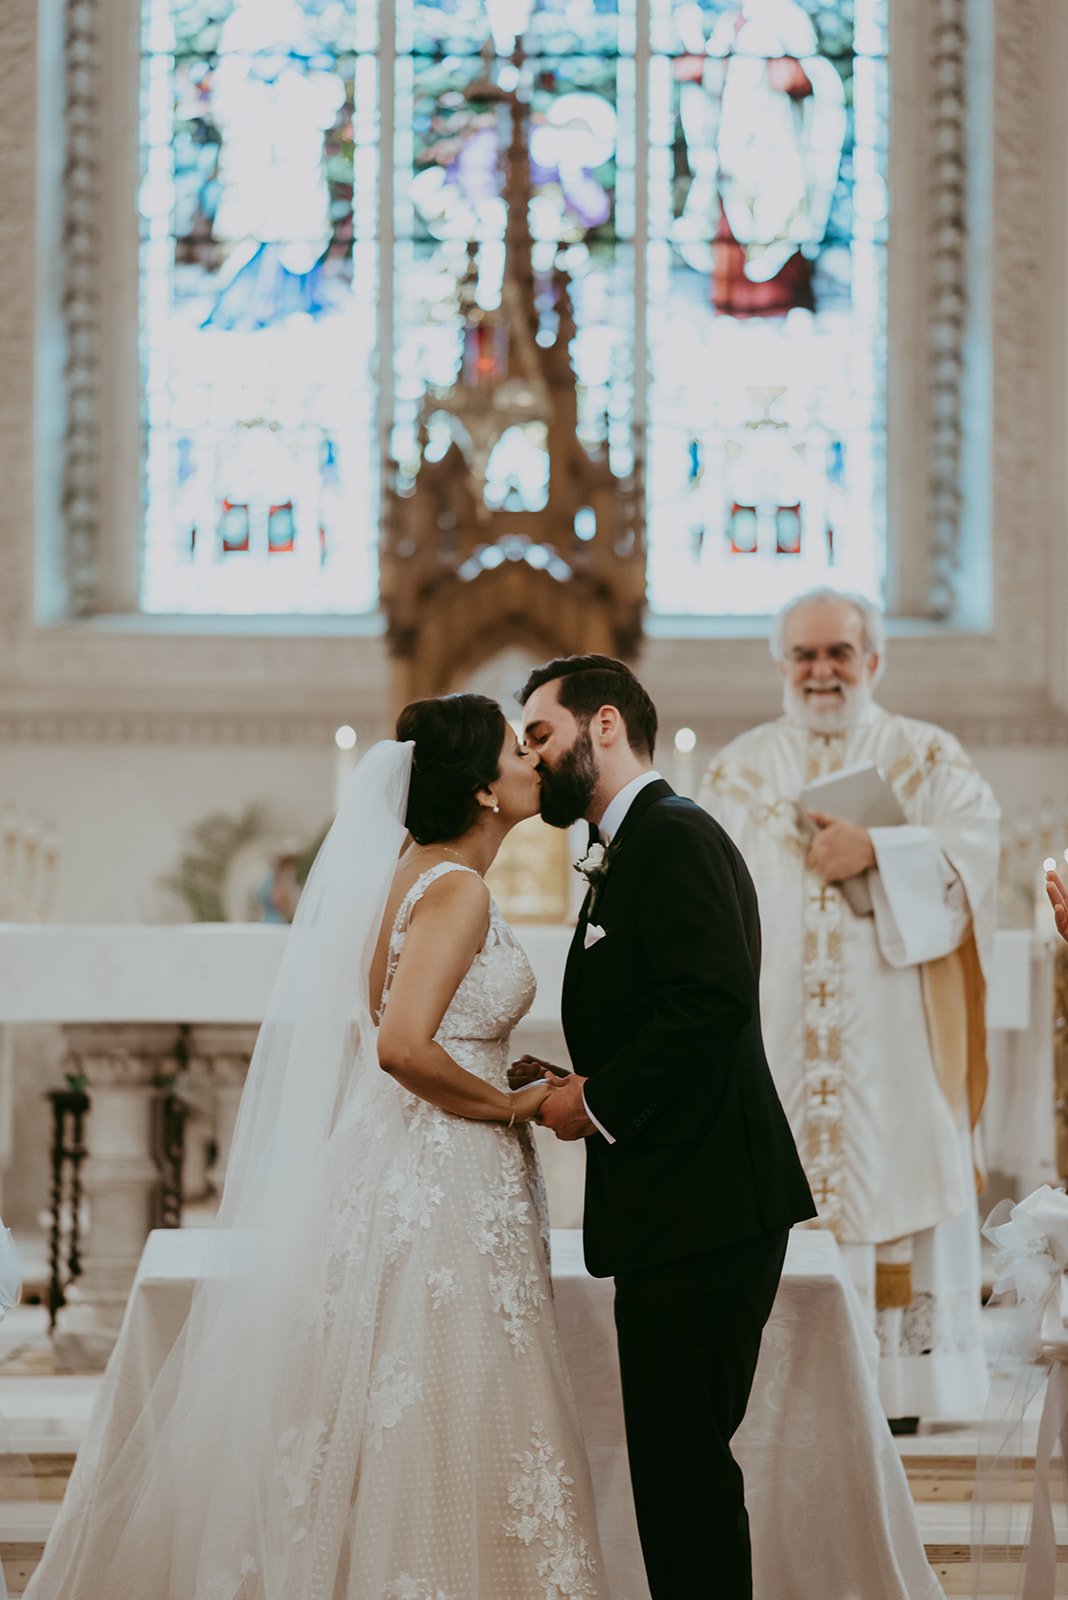 June-wedding-cathedral-of-saint-catherine-of-alexandria-ceremony-first-kiss.jpg